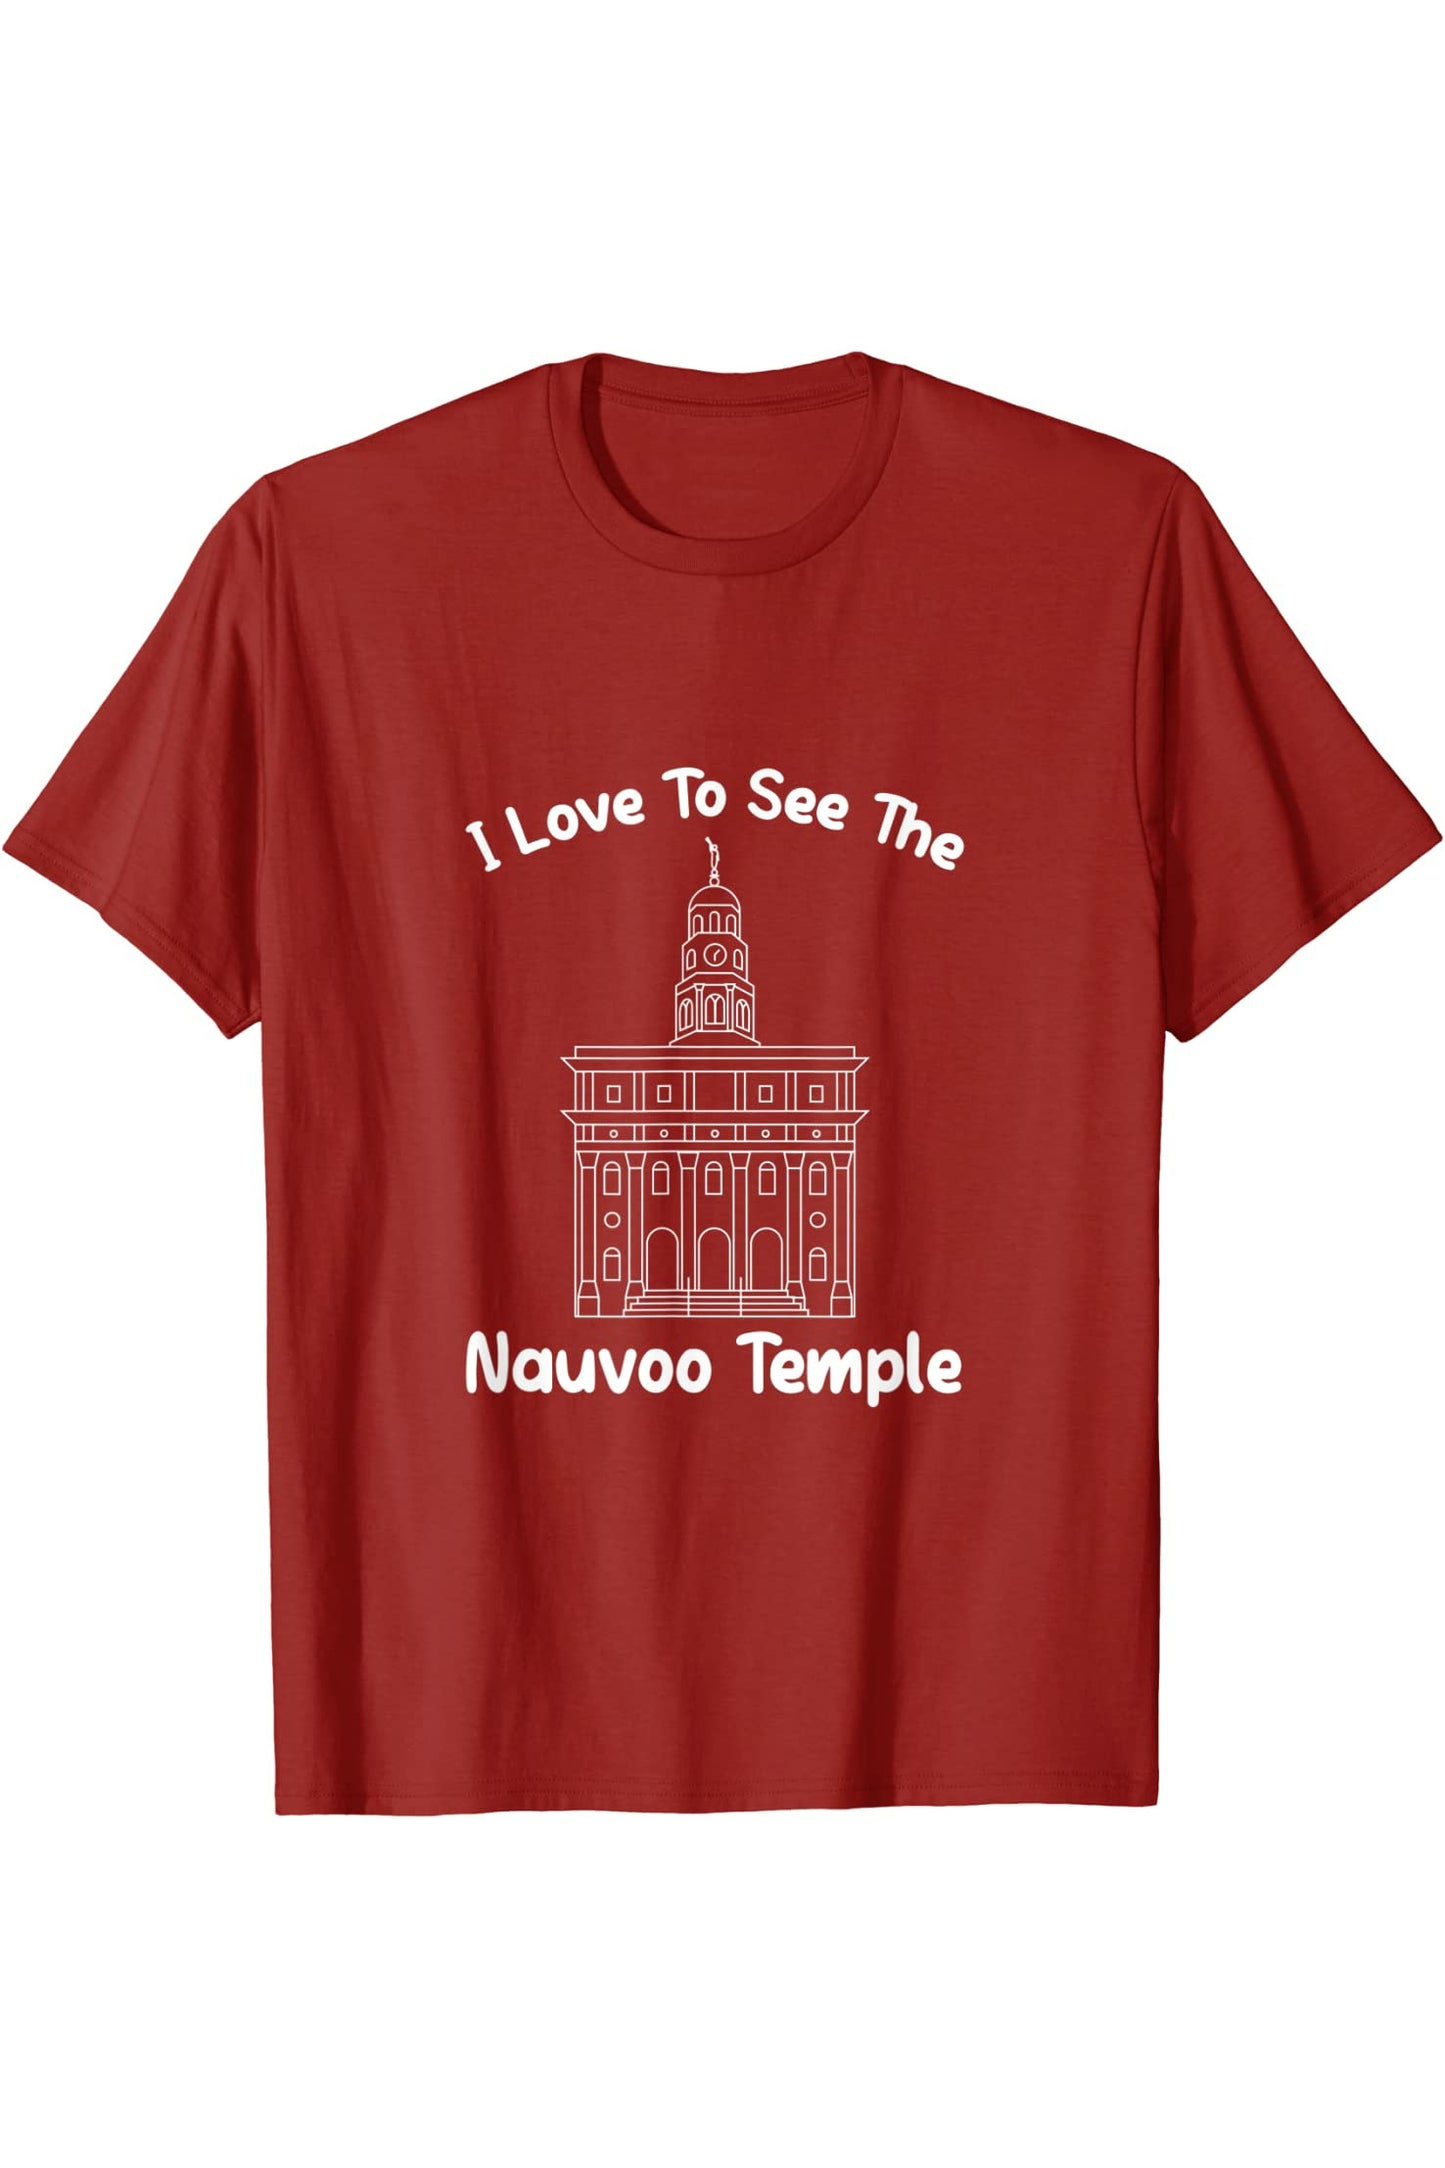 Nauvoo IL Tempel, I love to see my temple, primary T-Shirt